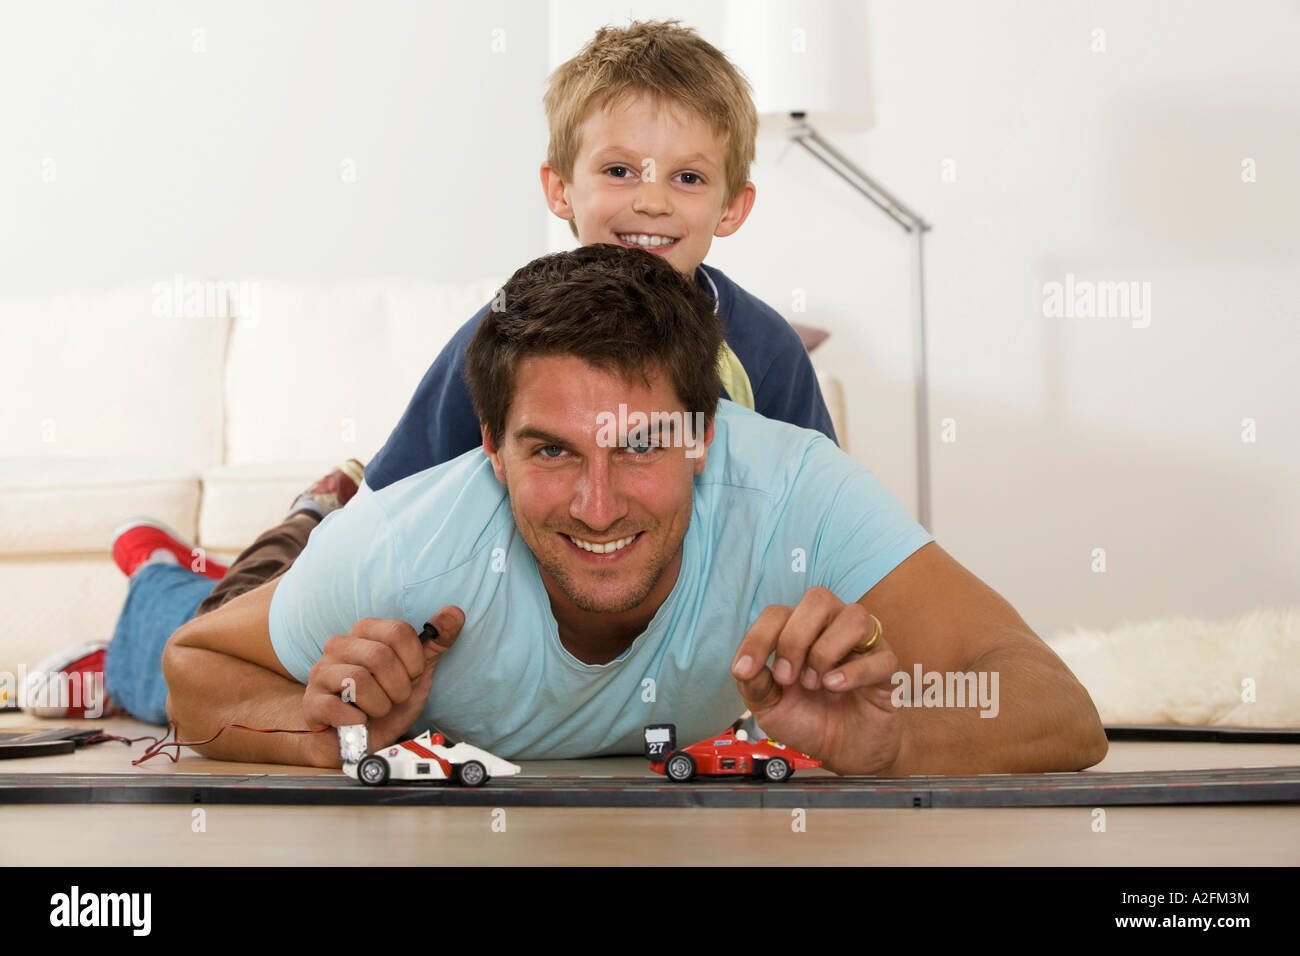 Father and son (6-7) playing with toy cars, smiling, portrait Stock Photo